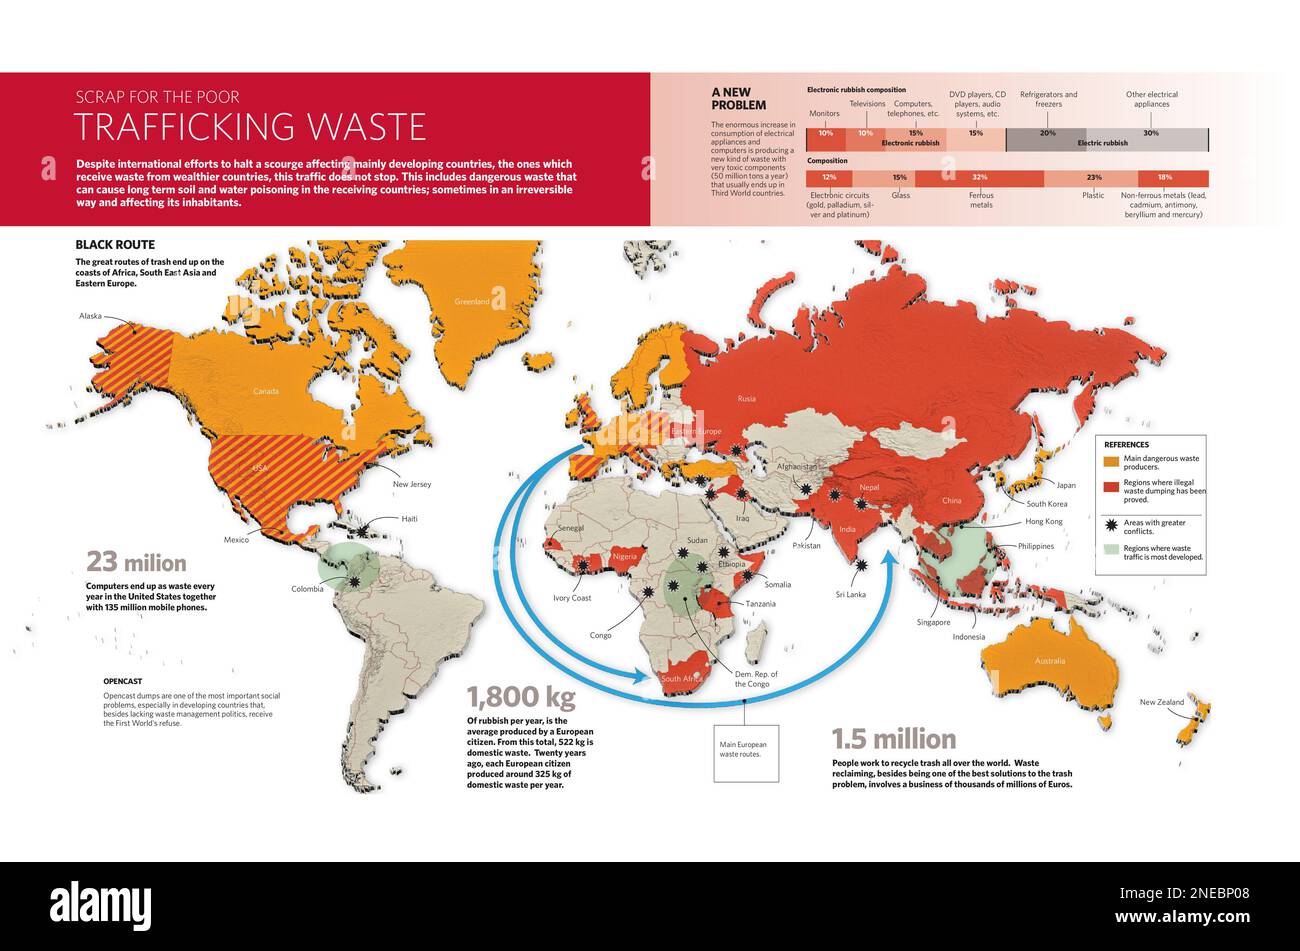 Computer graphics about world rubbish management and its traffic from wealthier countries to the poorest countries in the third world. [QuarkXPress (.qxd); 2480x3248]. Stock Photo